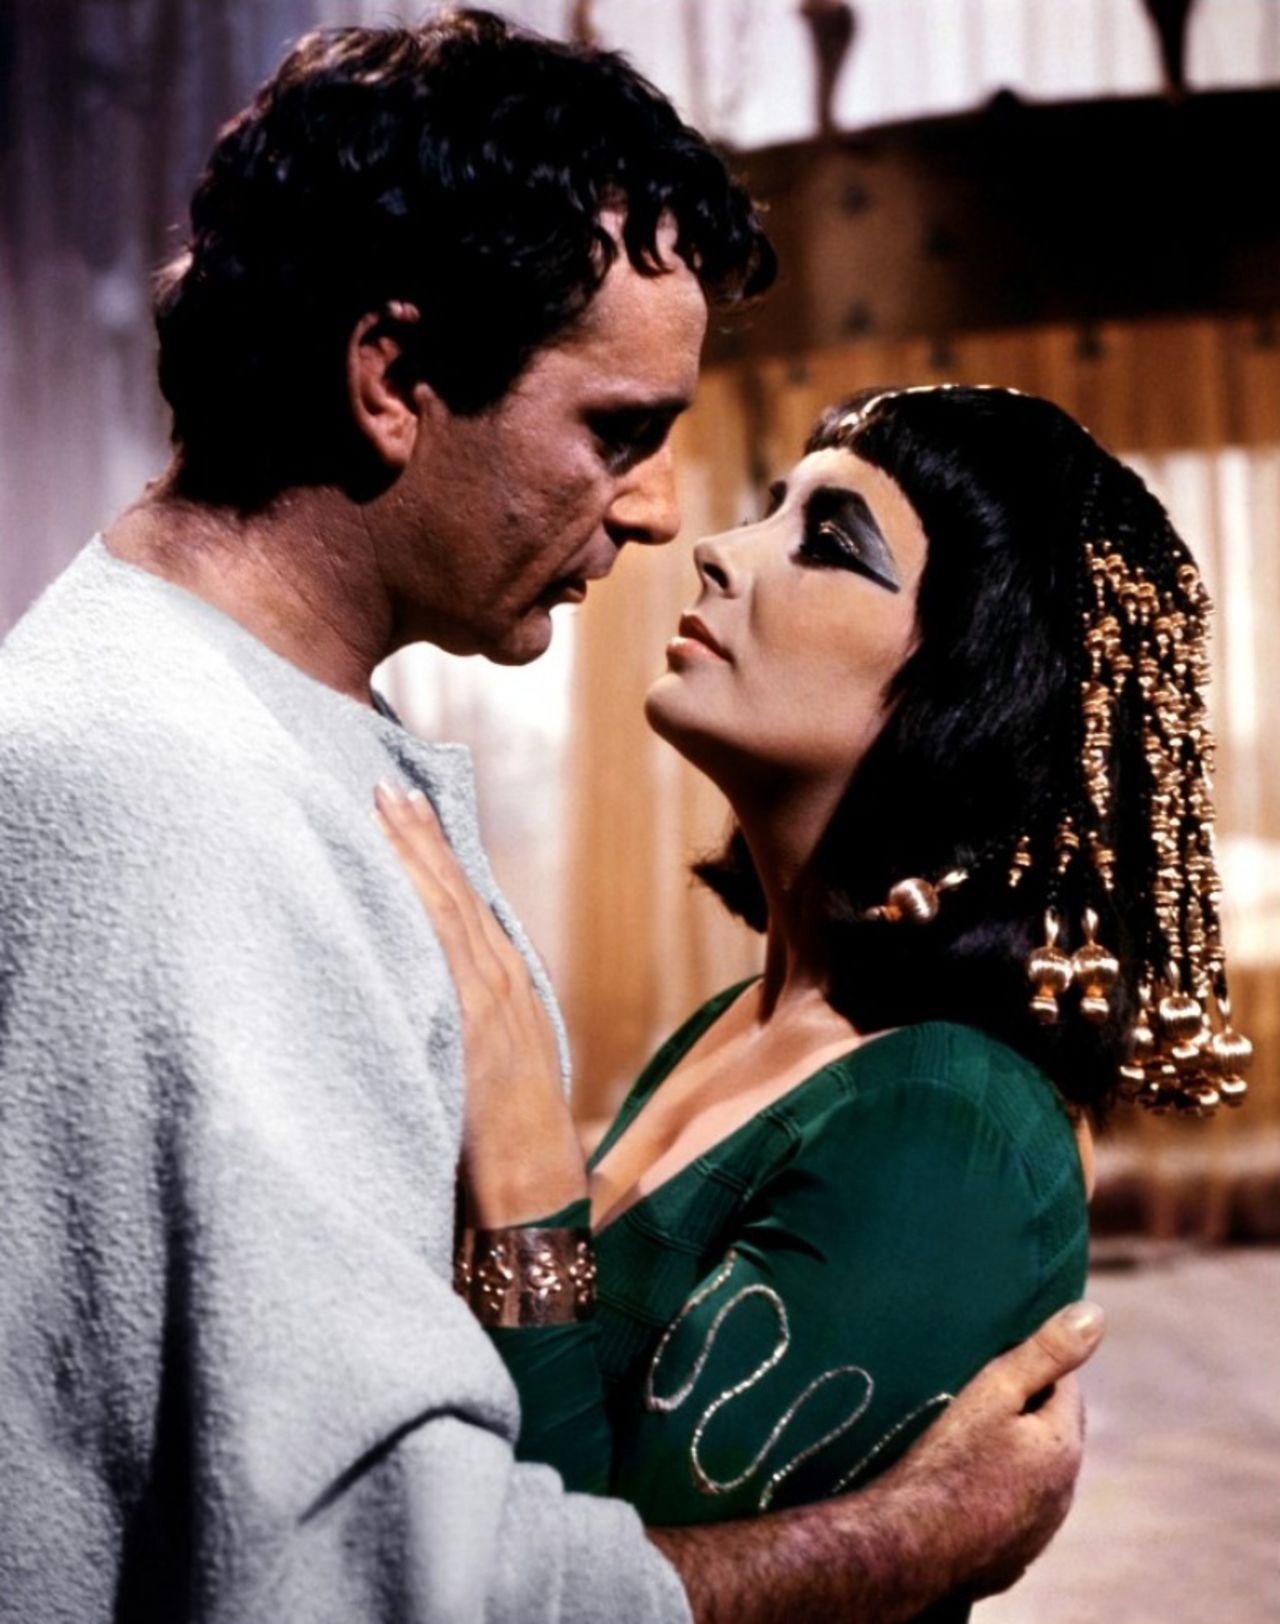 Hollywood's portrayal of Egyptian queen Cleopatra has been hotly debated, as some feel that casting a non-woman of color -- most famously done in 1963 with Elizabeth Taylor -- is a classic example of Hollywood whitewashing. When Angelina Jolie was mentioned as a successor to Taylor's iconic performance, <a href="http://marquee.blogs.cnn.com/2010/06/17/backlash-over-angelina-jolie-as-cleopatra/" target="_blank">many vehemently disagreed</a>, saying that it was time to cast a woman of color. 